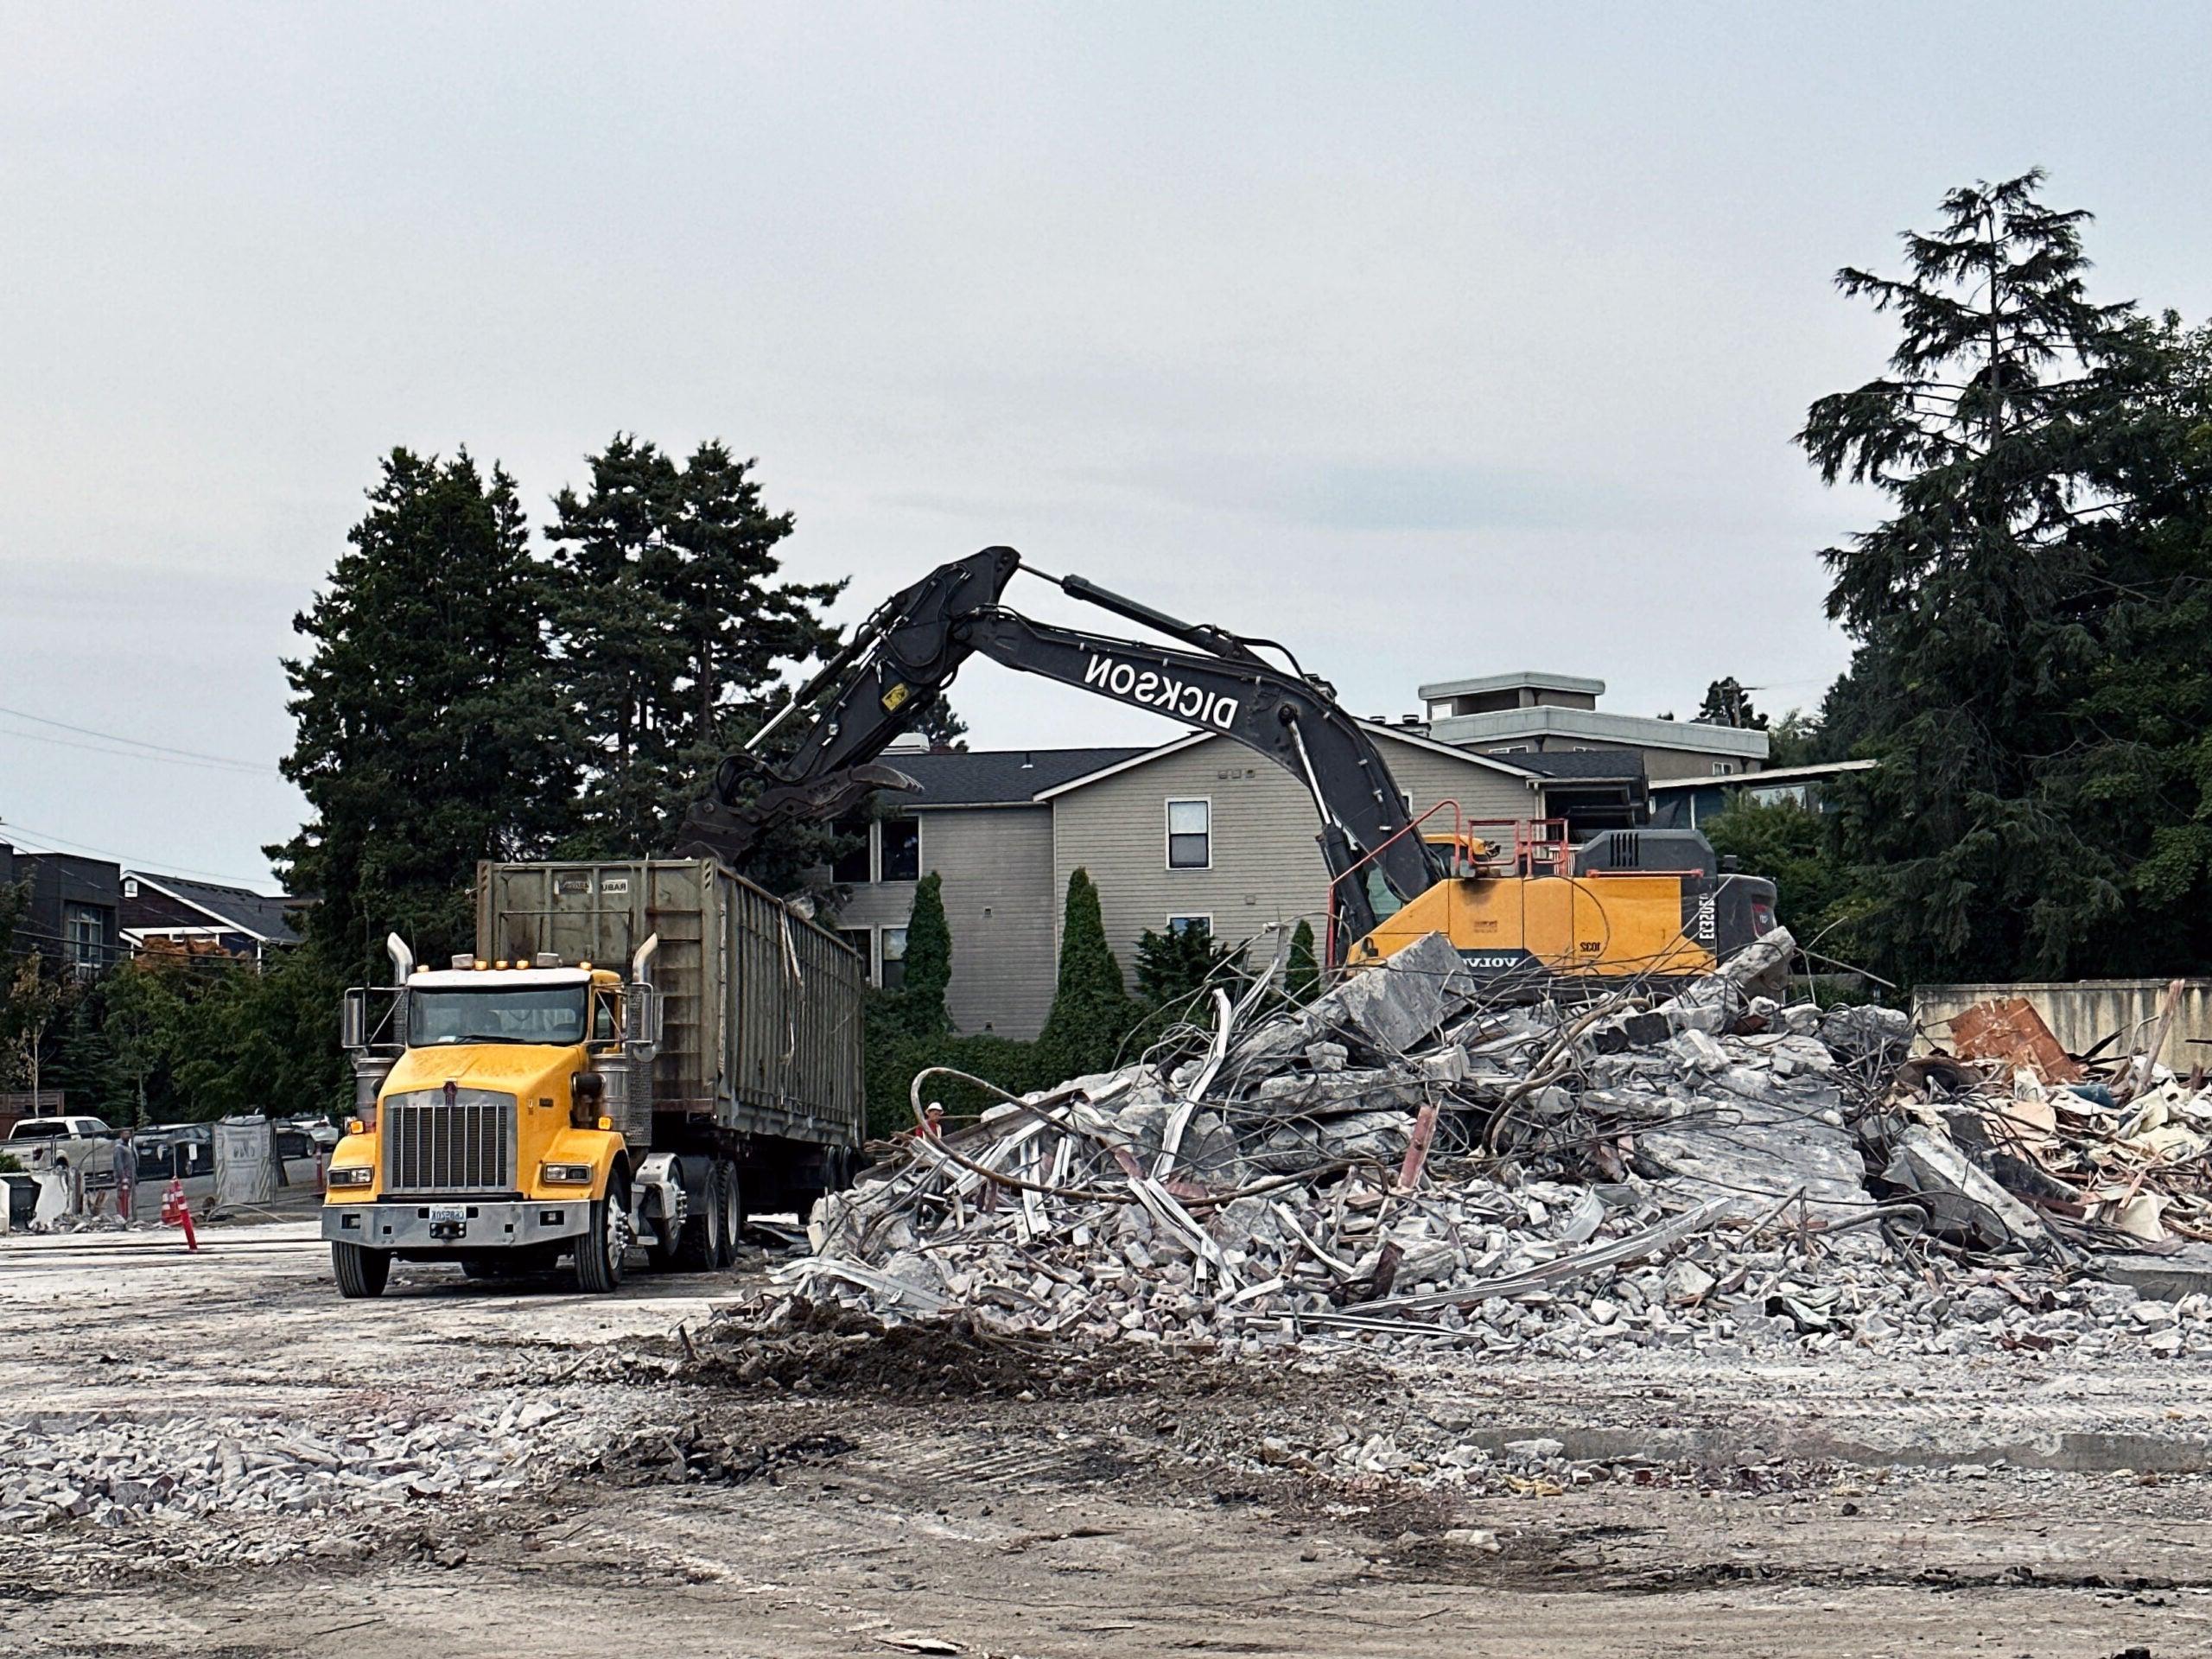 an excavator is on top of a pile of concrete rubble emptying into a container on a truck